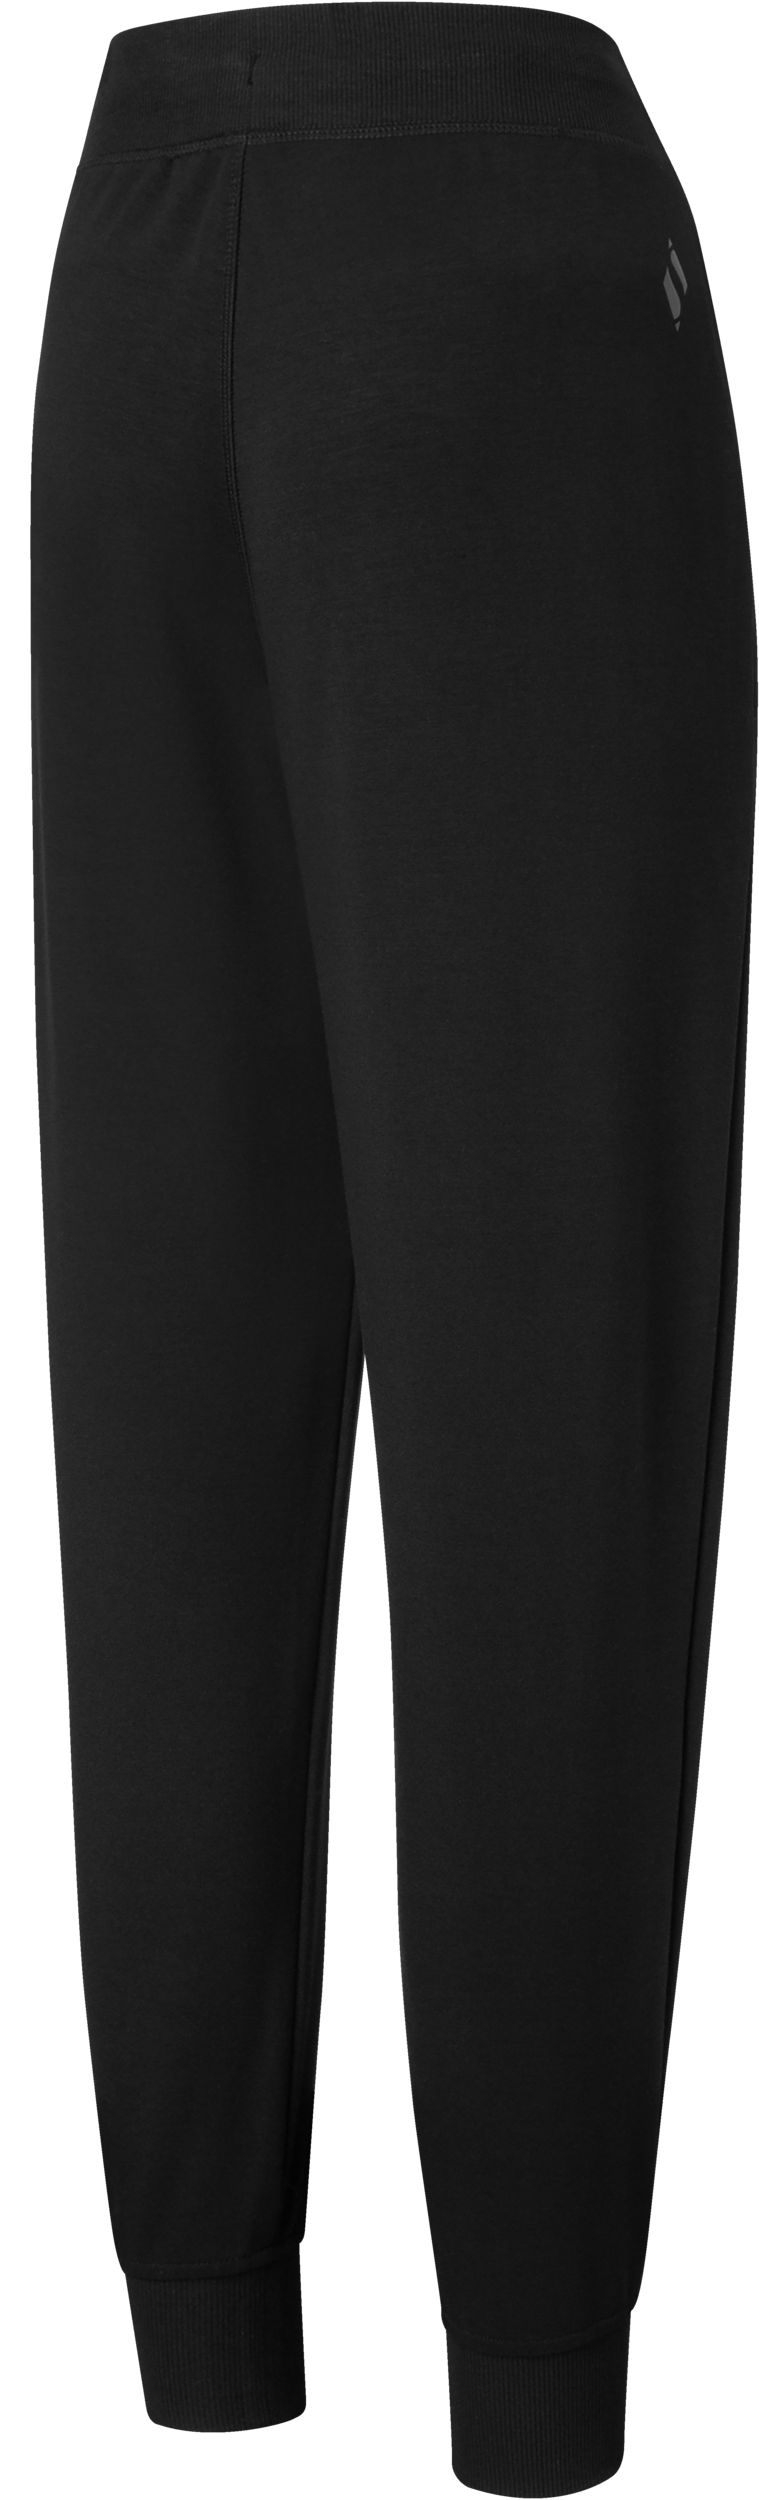 Skechers Ladies Skechluxe Restful Jogger Pant – More Sports